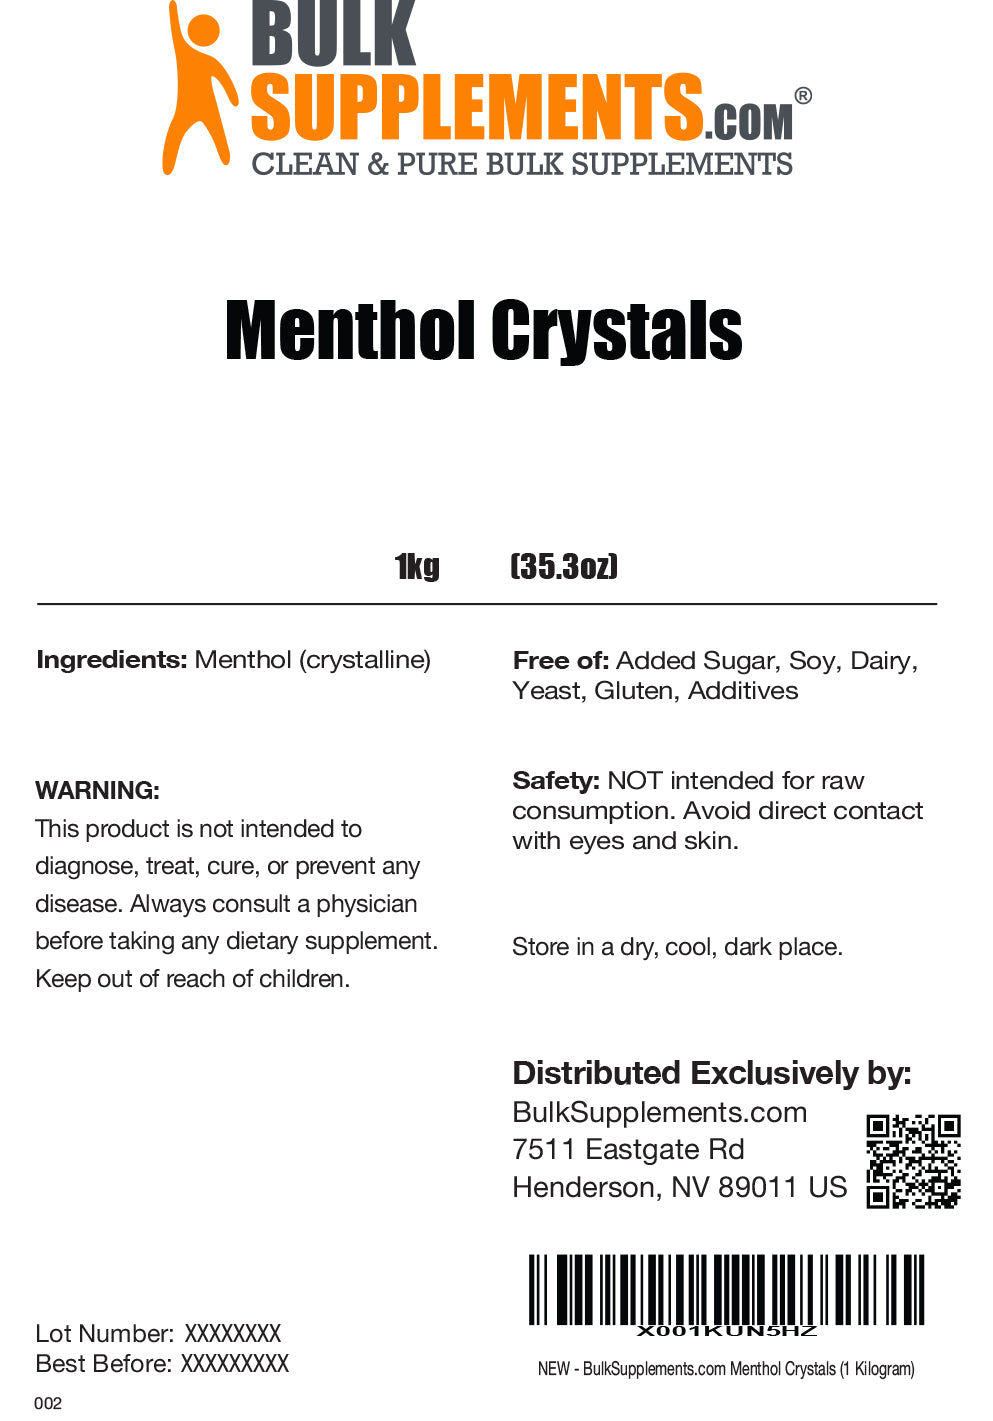 Ingredients and Safety Warnings Menthol Crystals